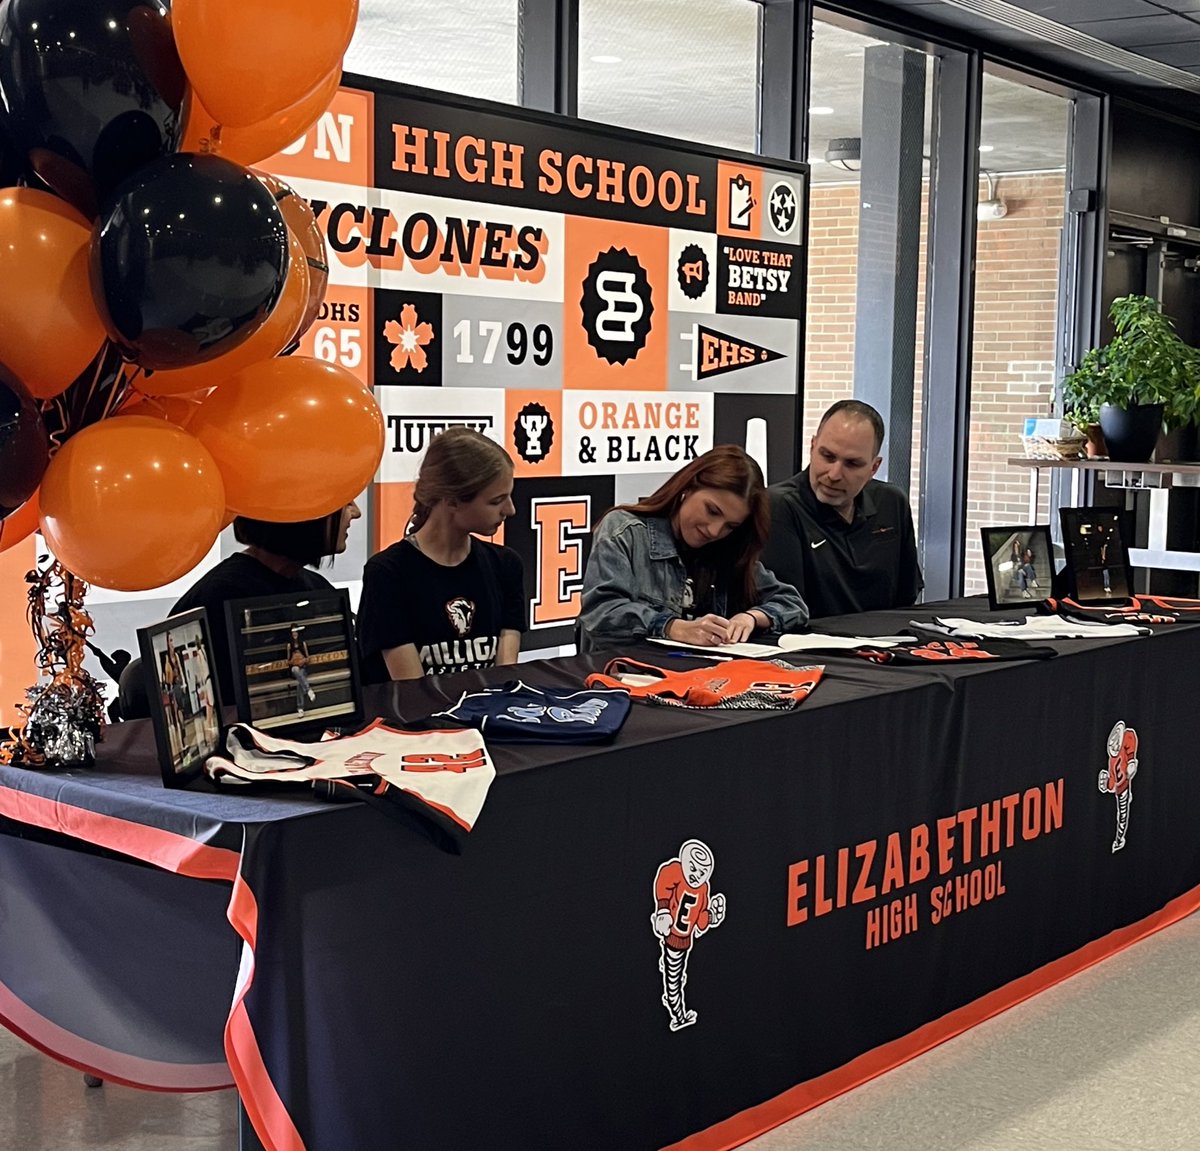 We’re excited to add another local player to the bunch! Please welcome Reiley Whitson from Elizabethton HS.